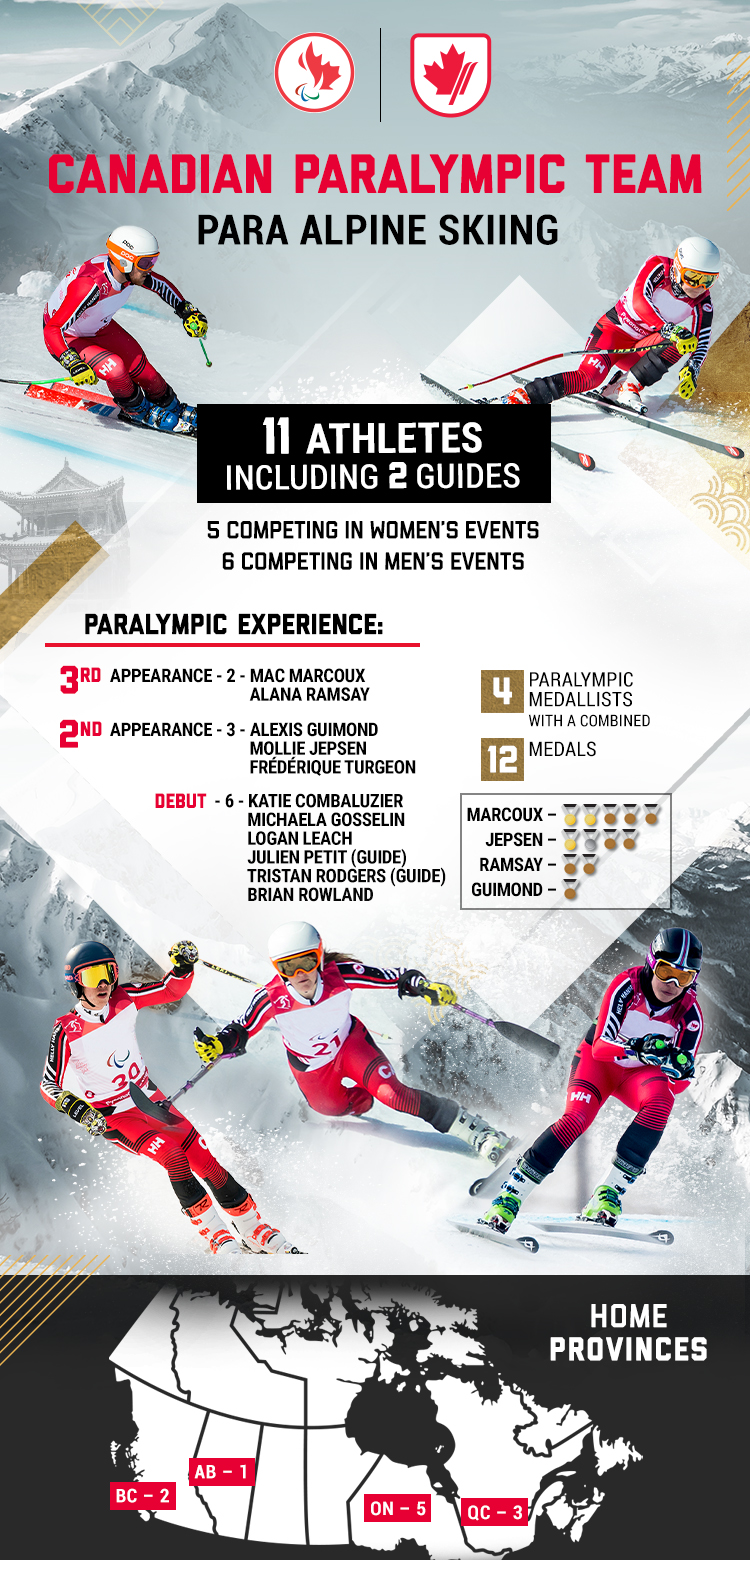 An infographic showing stats about Canada's Para alpine team for the Beijing 2022 Paralympic Winter Games